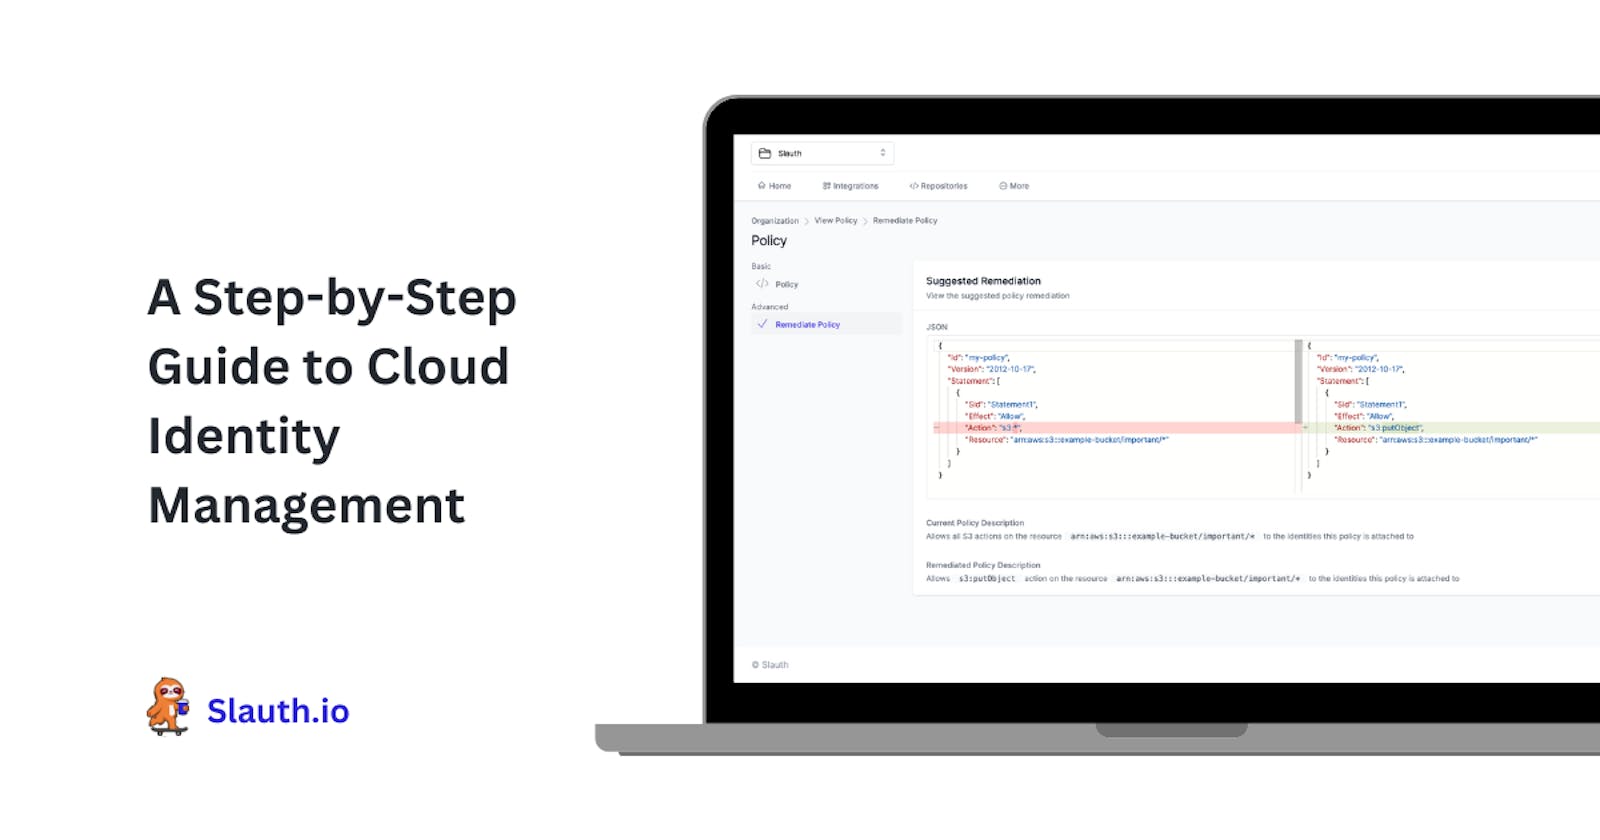 A Step-by-Step Guide to Cloud Identity Management